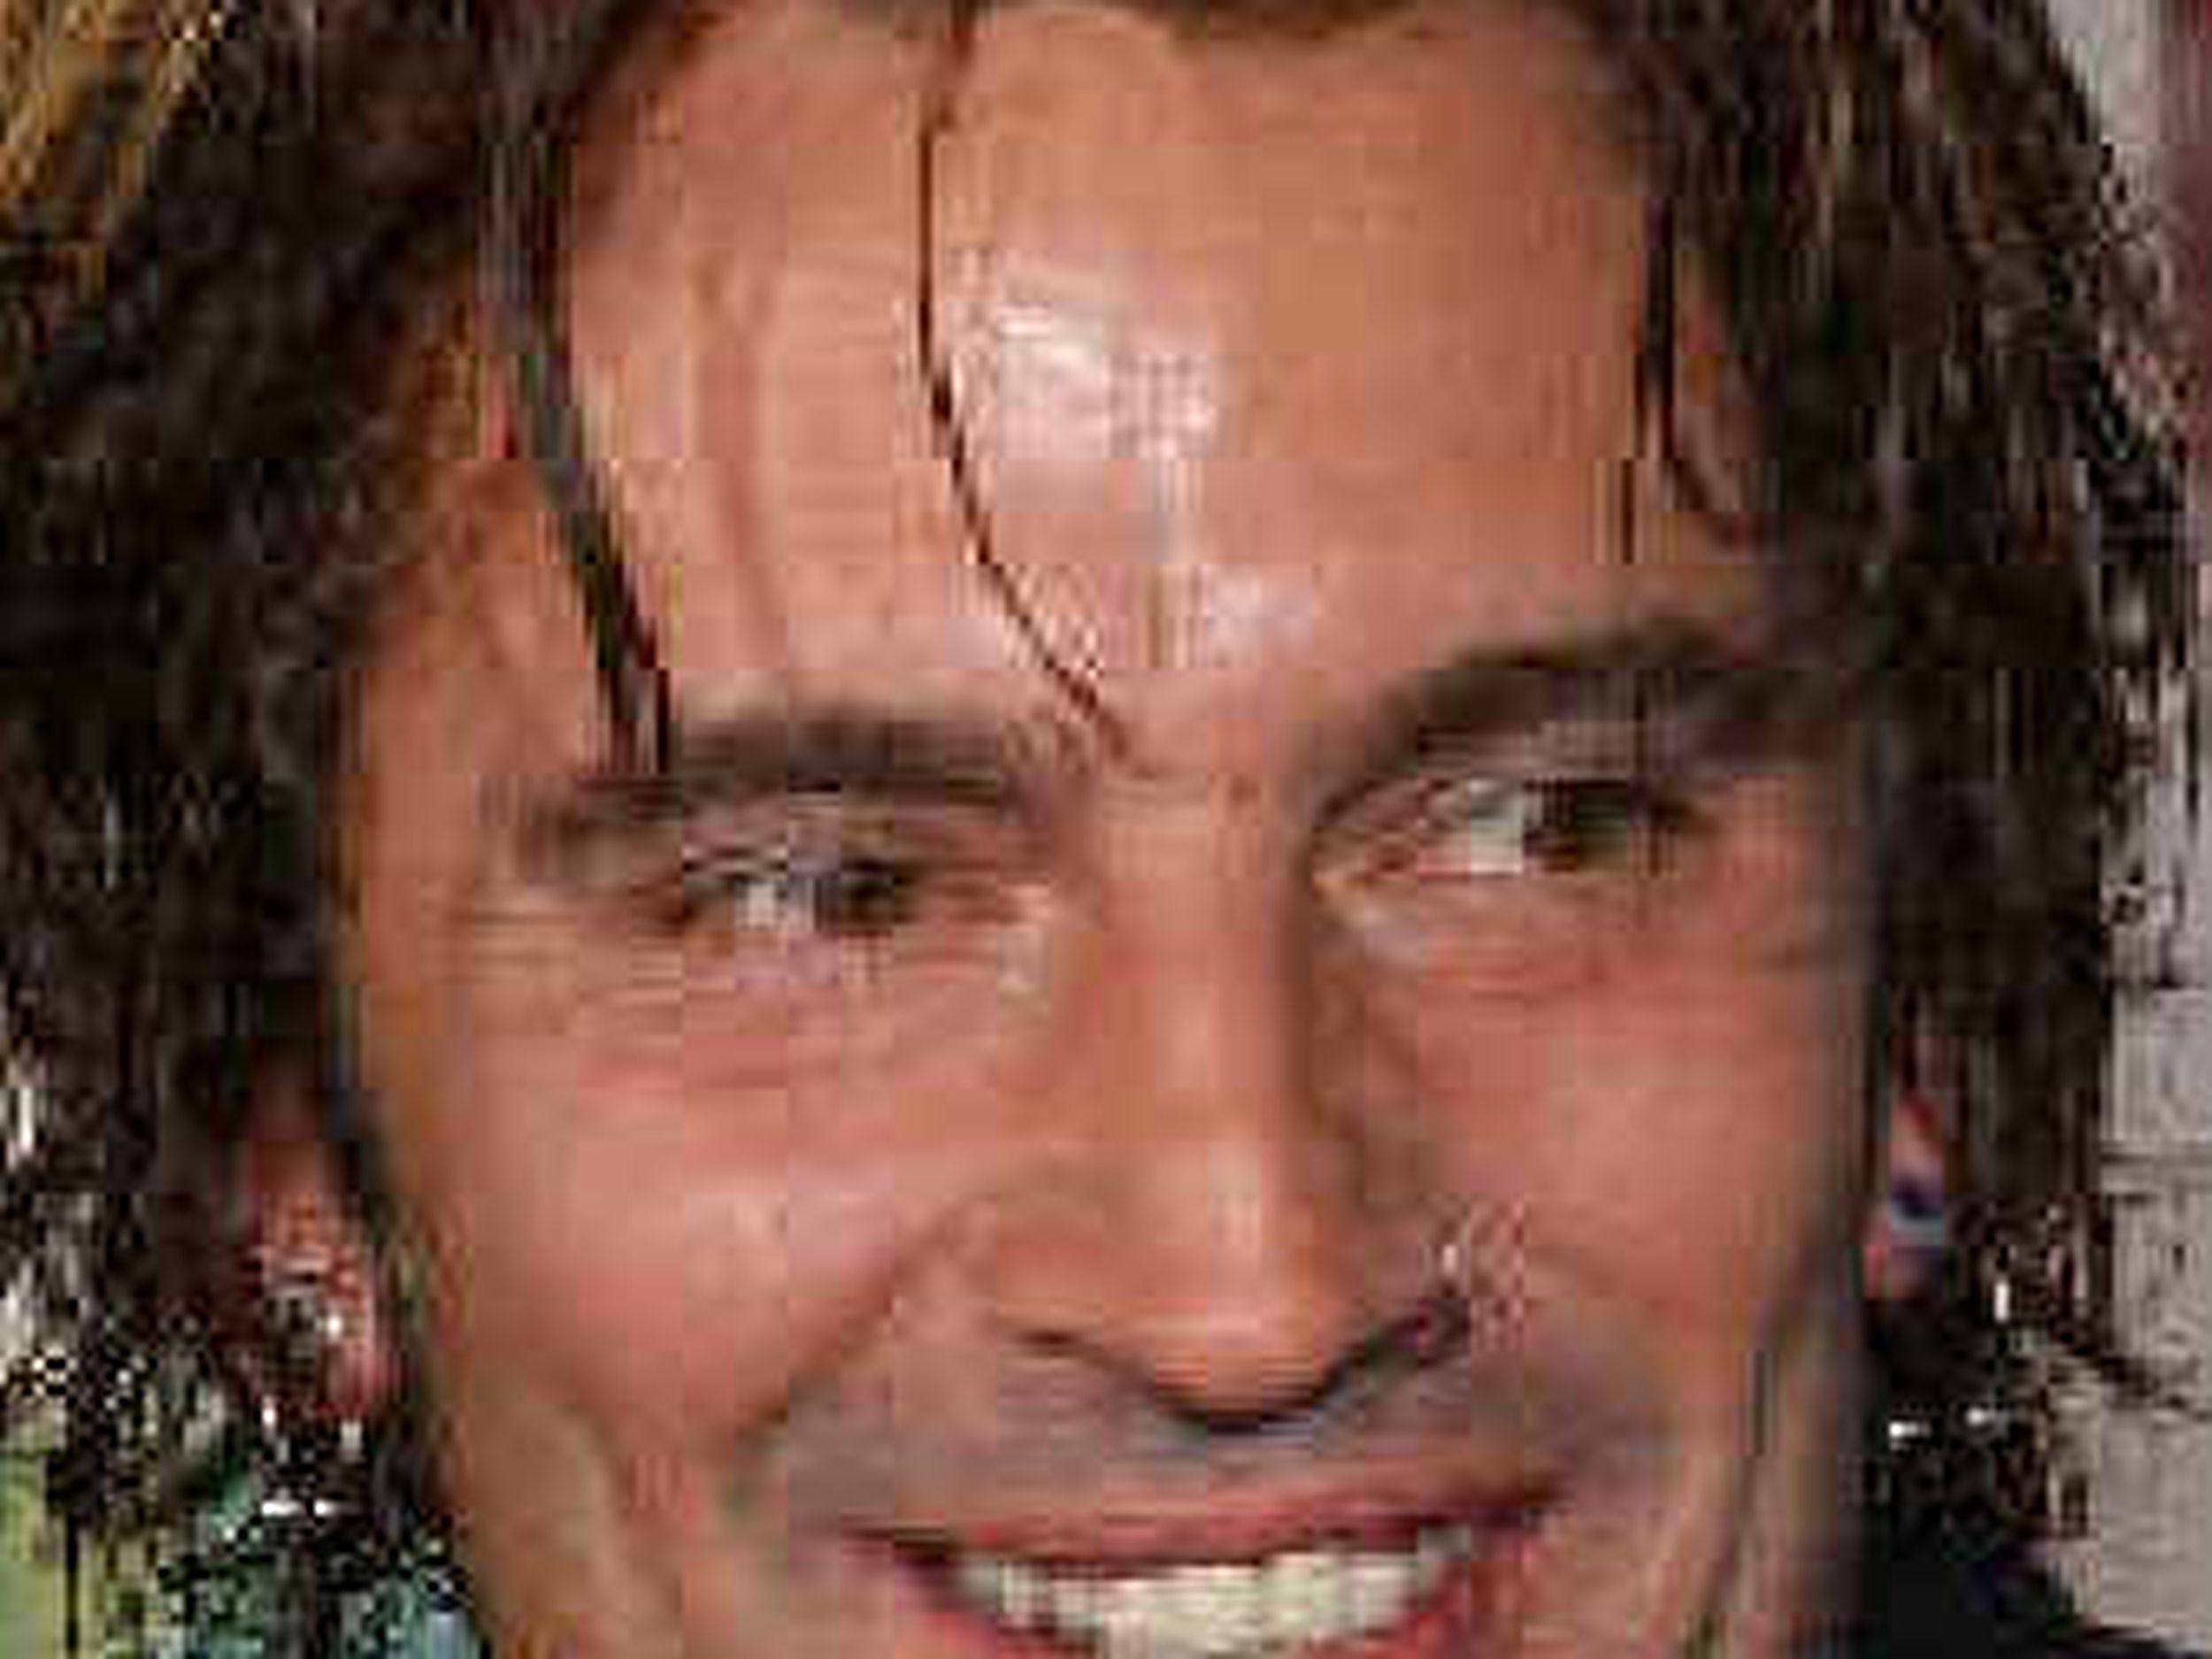 Come on, now, nobody doesn't like Tommy Lee | The Spokesman-Review